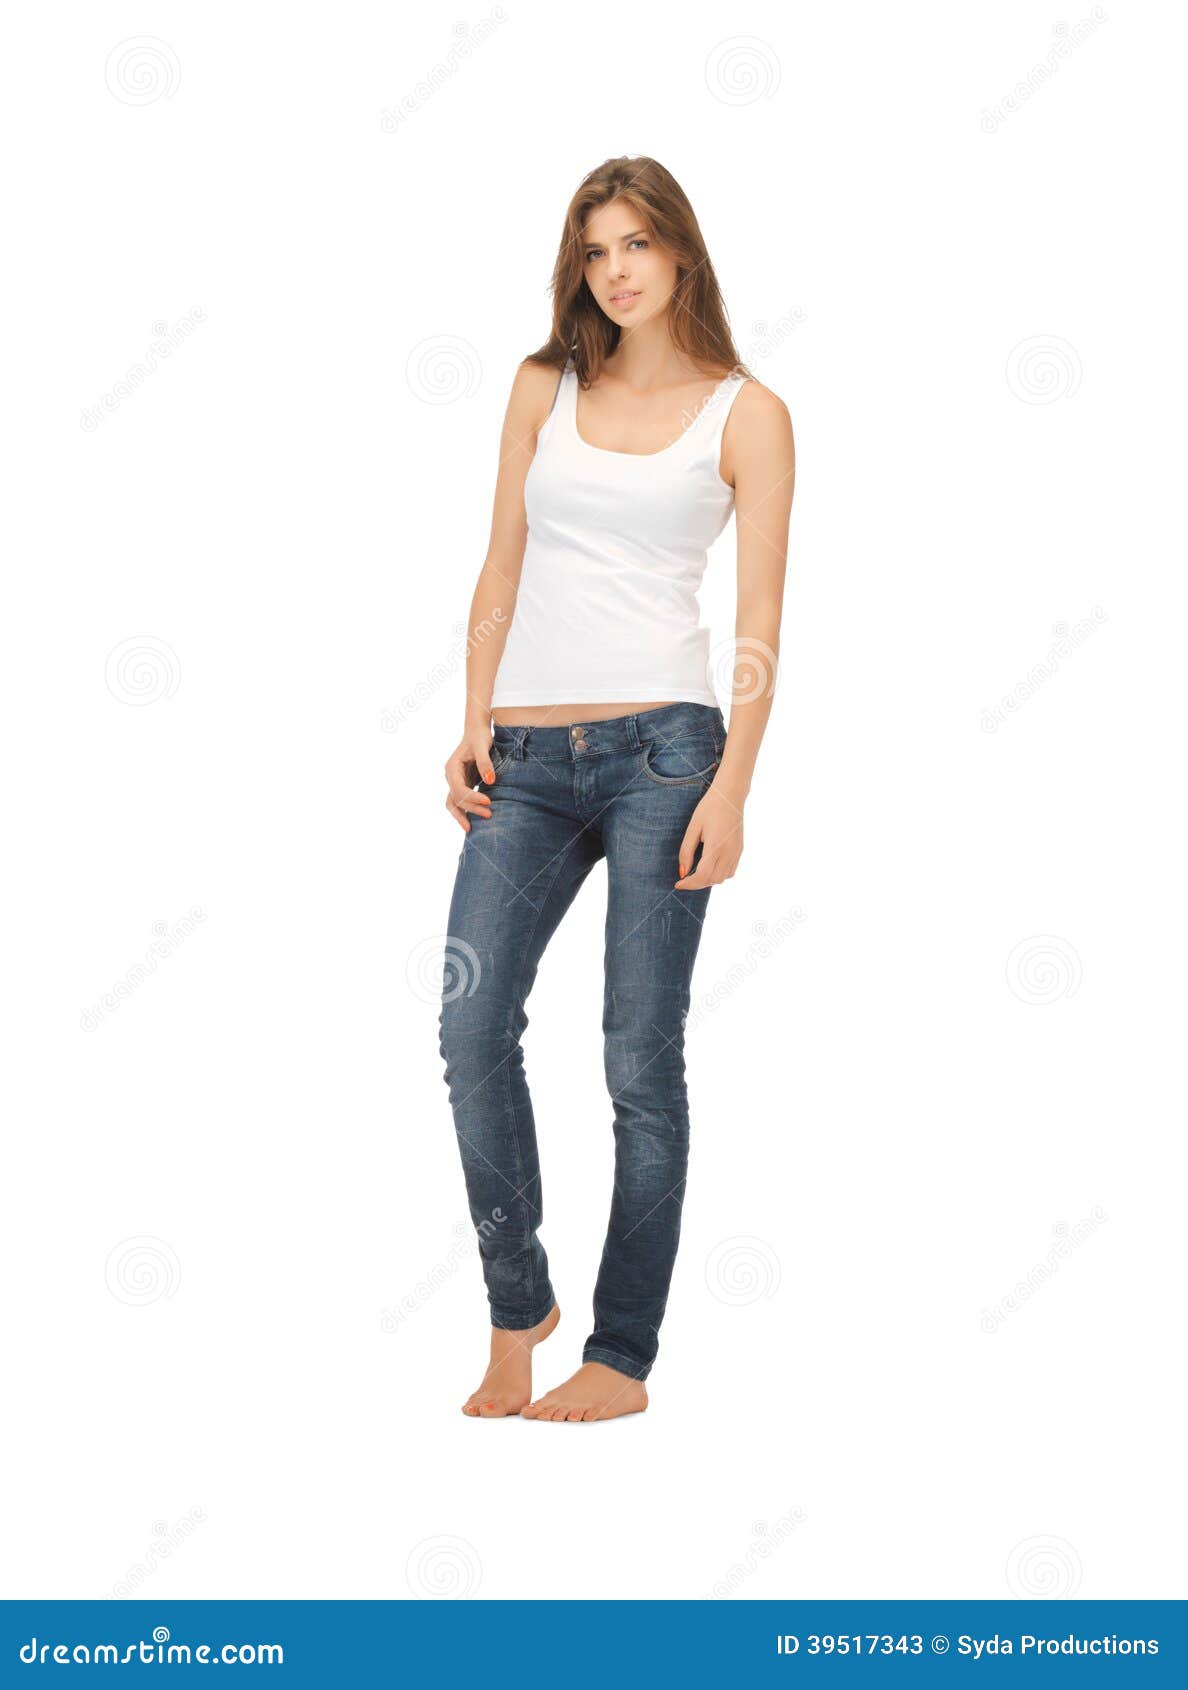 Woman in Blank White T-shirt Stock Image - Image of cool, kind: 39517343